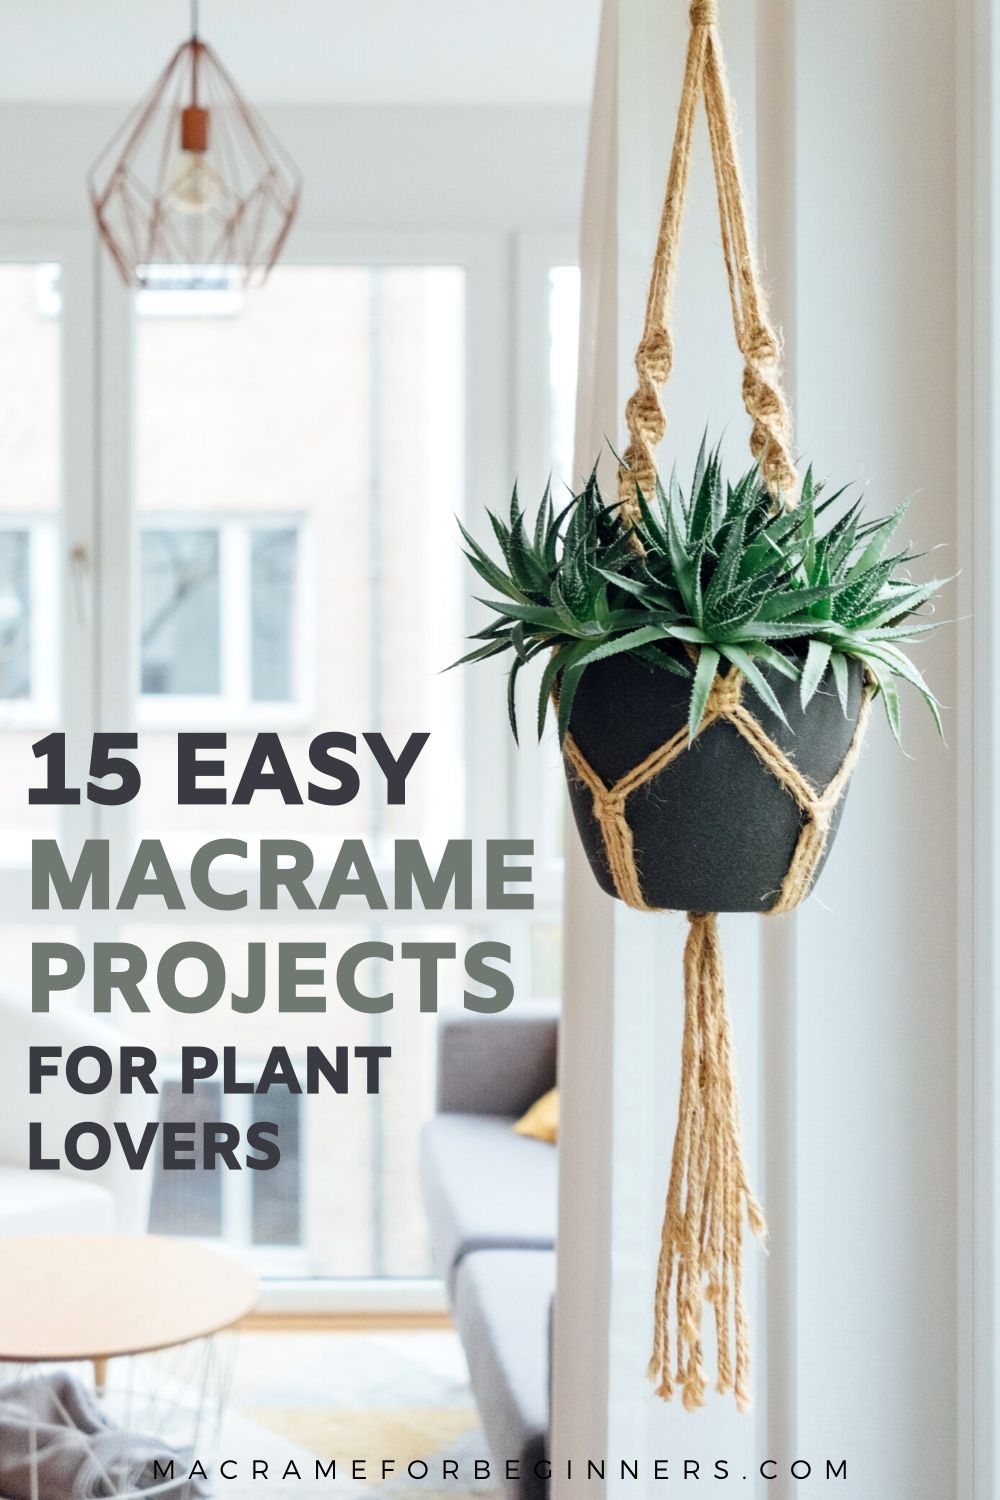 15 Easy DIY Macrame Projects for Plant Lovers